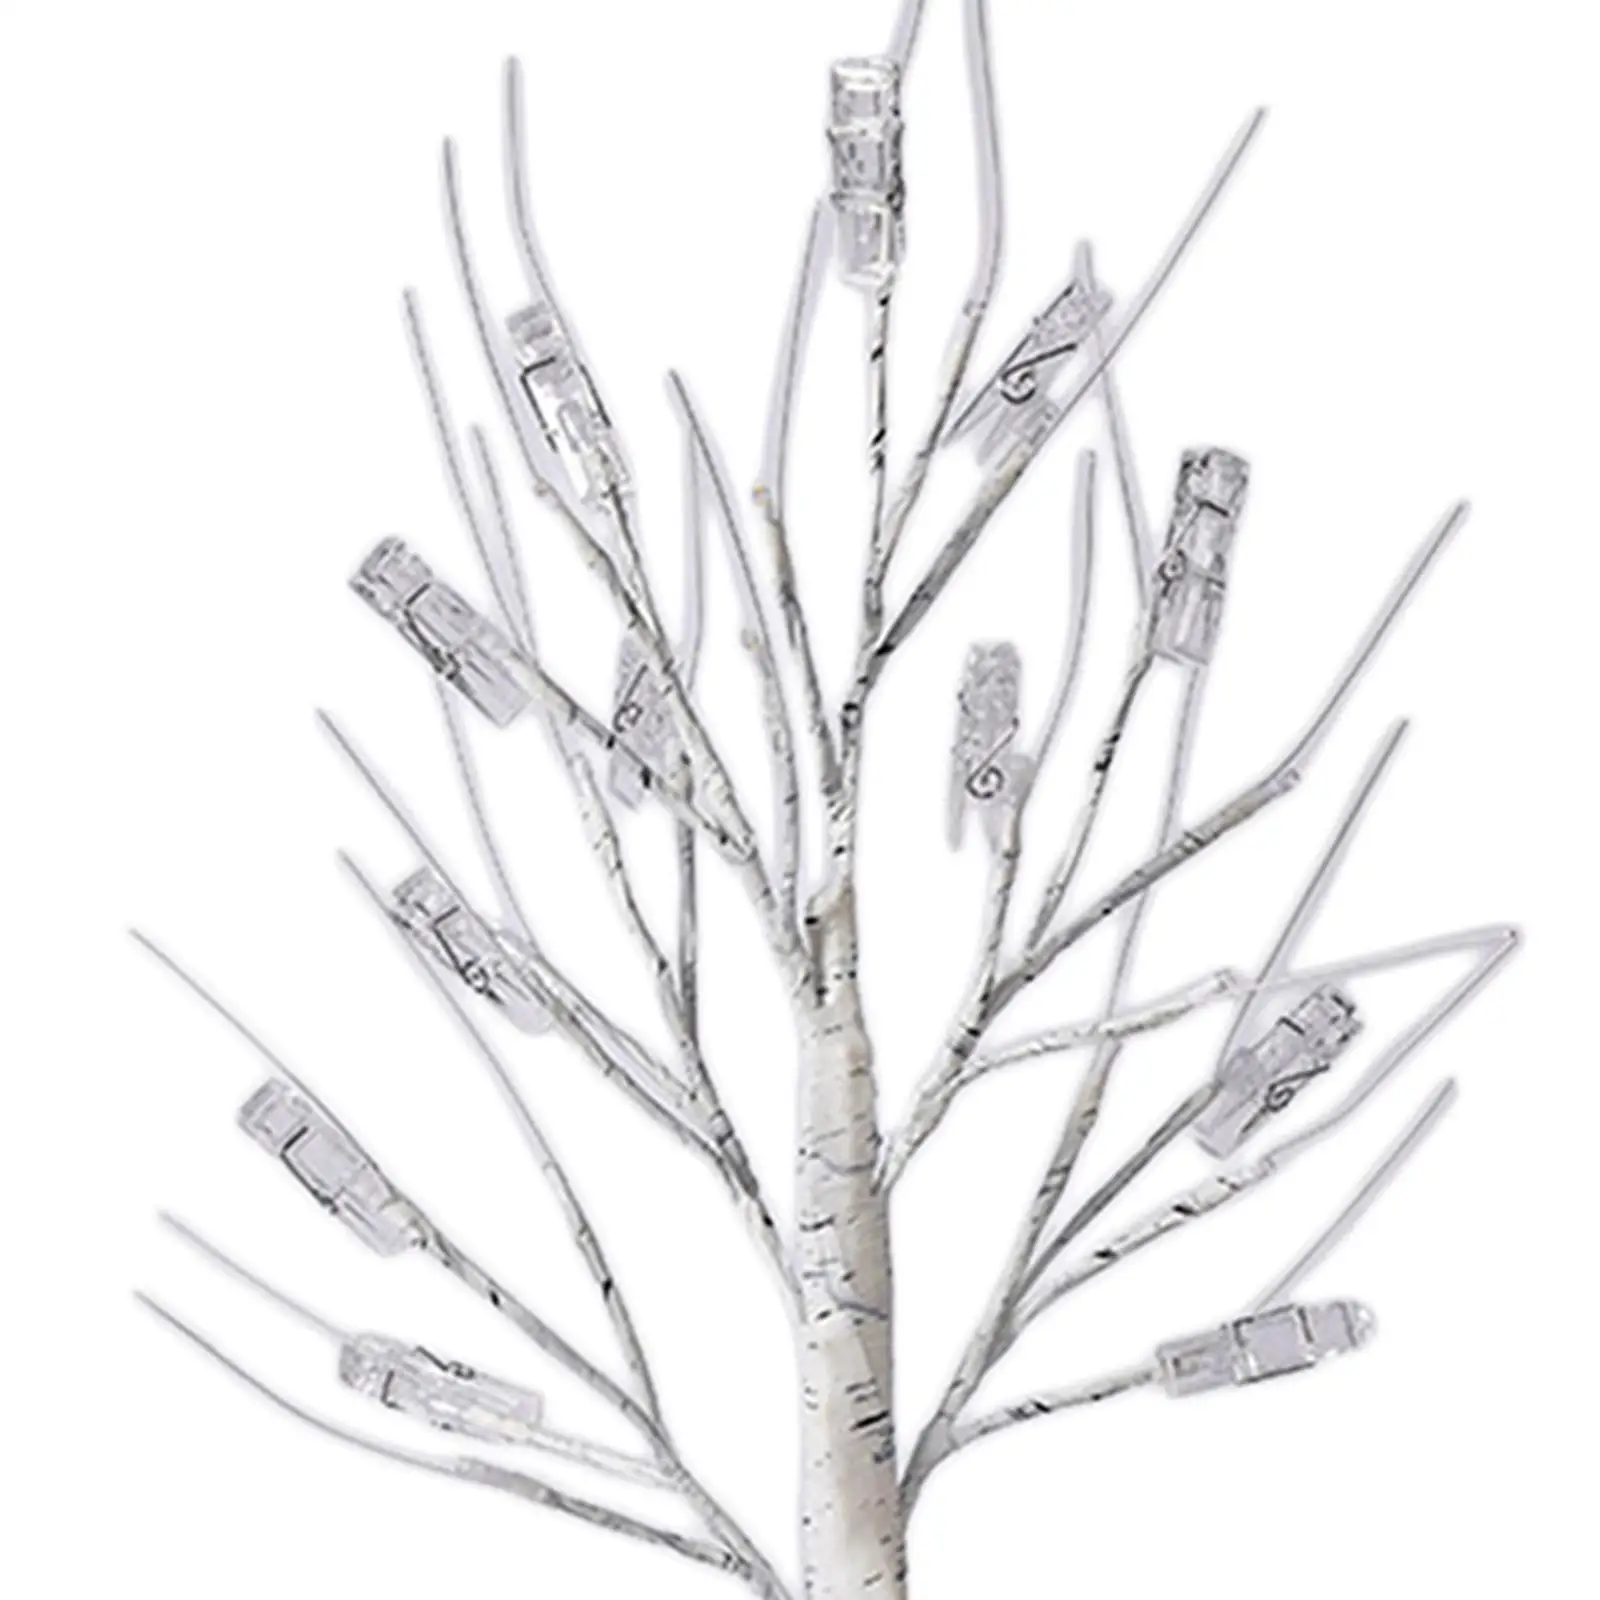 Tree with Lights Display Trees Stands with Clips Memo Bedroom LED Nightlight